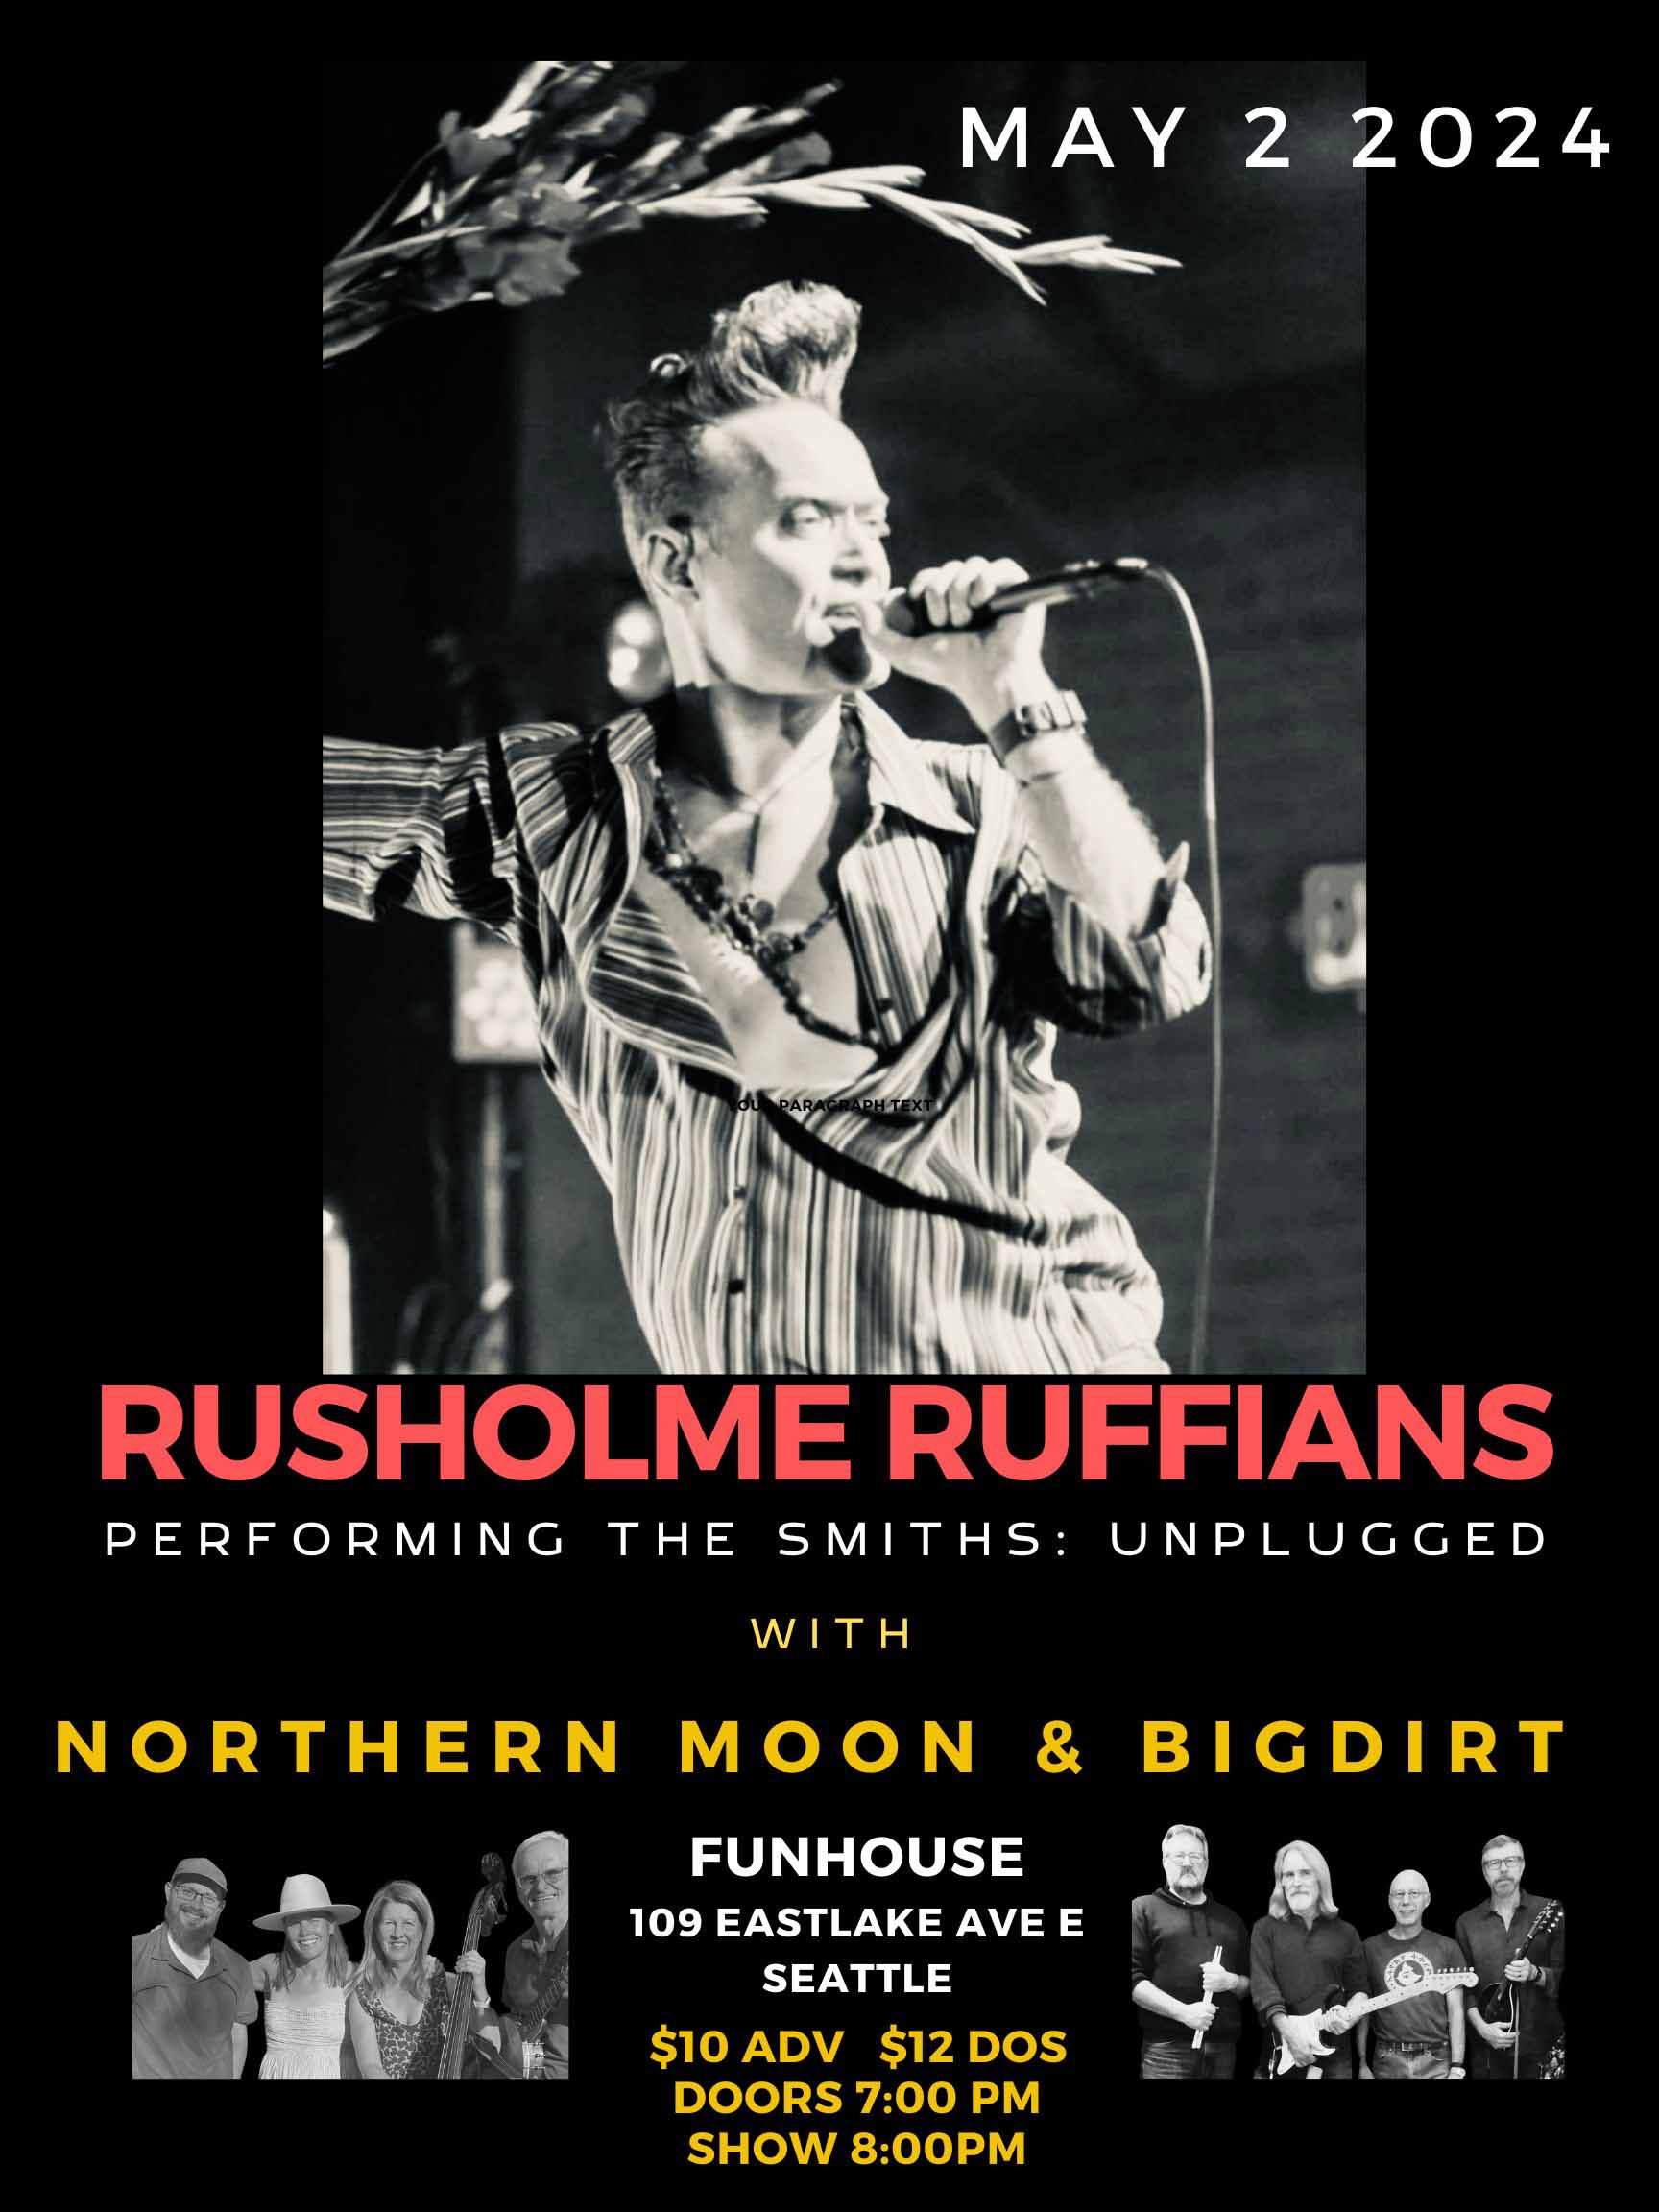 Rusholme Ruffians - performing The Smiths: Unplugged